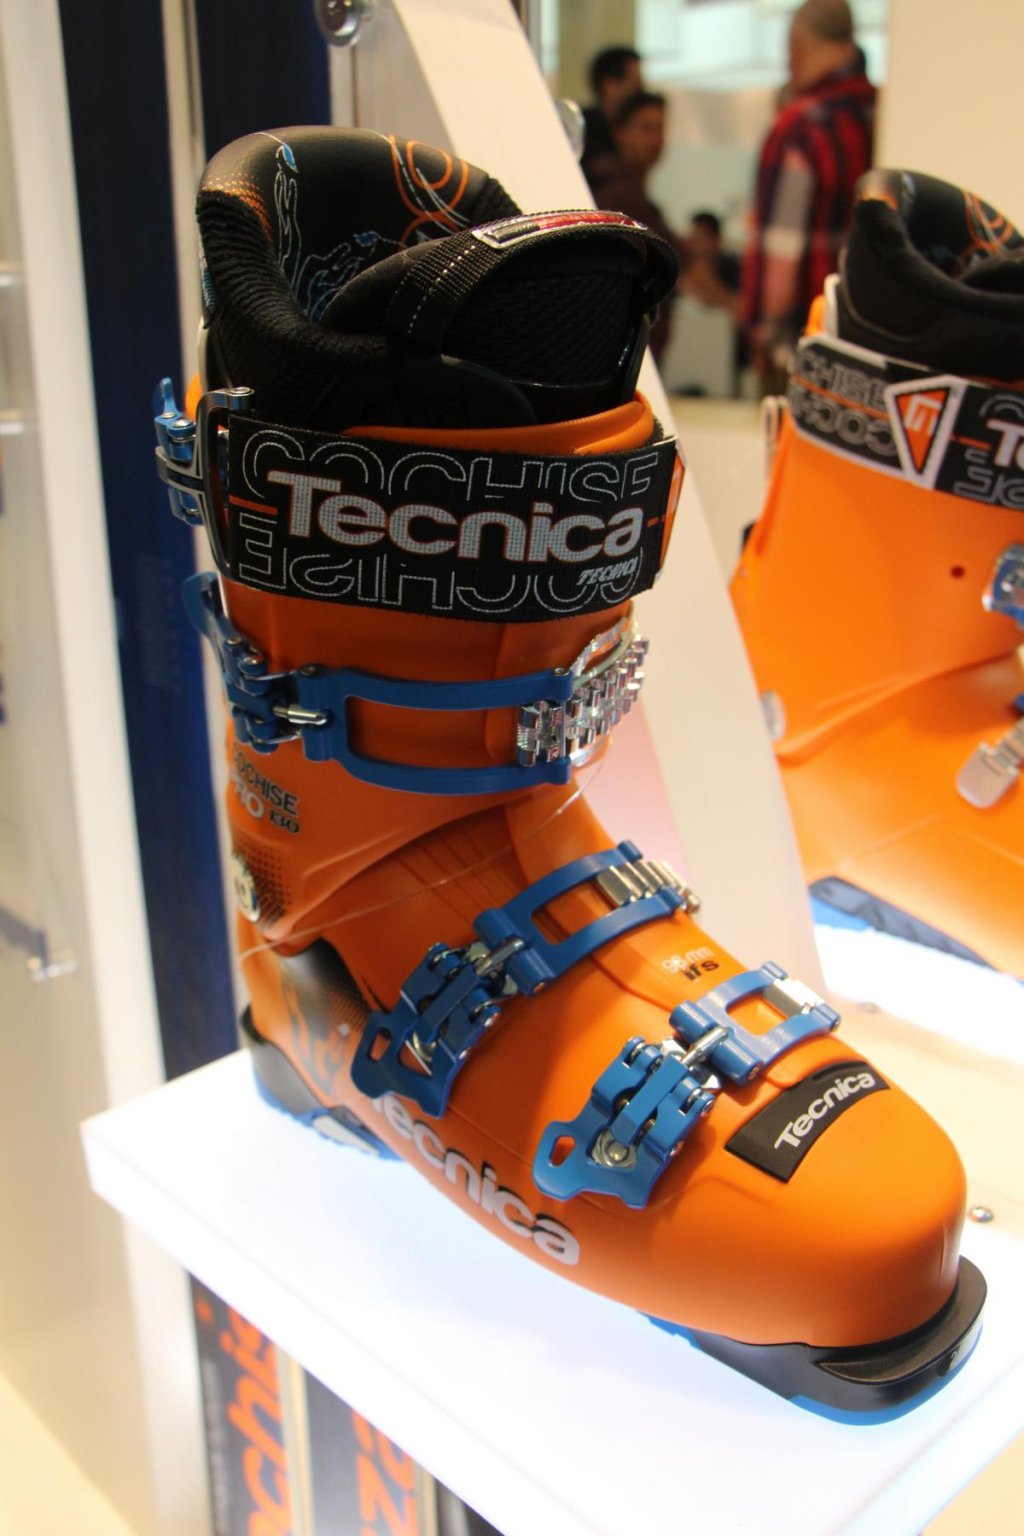 Lighter, better fit and very orange. The new Cochise Pro 130 from Tecnica